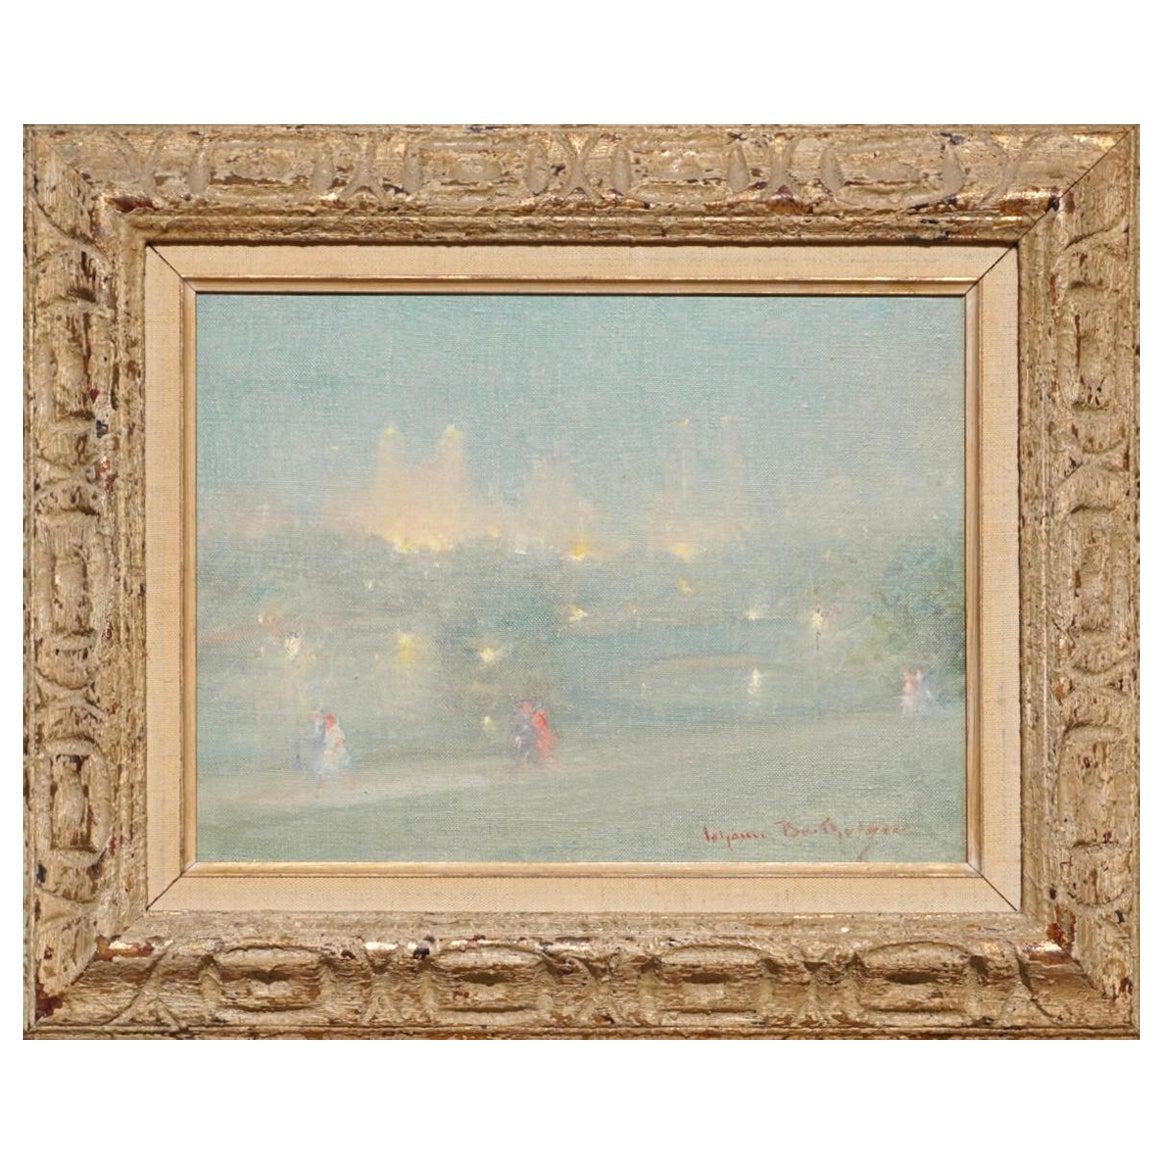 Johann Berthelsen Danish/American, 1883-1972 “The Blue Bridge Central Park” with People hand in hand in the spring or summer dusk with the lights of downtown Manhattan in the background. 
Signed Johann Berthelsen (lr) 
Oil on canvas 
Canvas: 12 x 9 